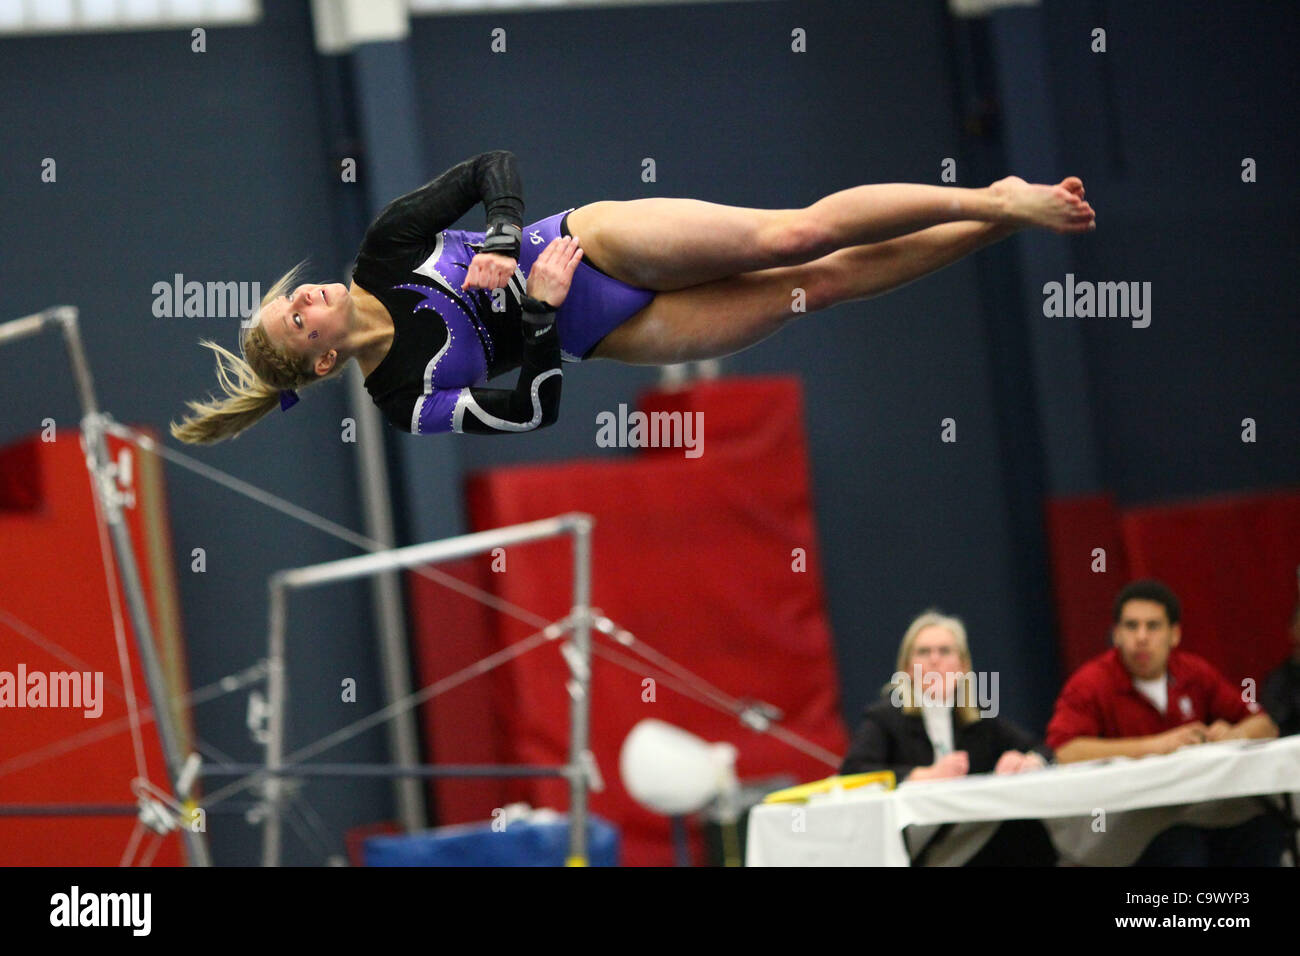 Winona State University gymnast Brooke Baures sails through her floor routine during a competition against Hamline University at the Hamline field house, Saint Paul, Minnesota, Feb. 26, 2012. Winona State won the meet. Stock Photo